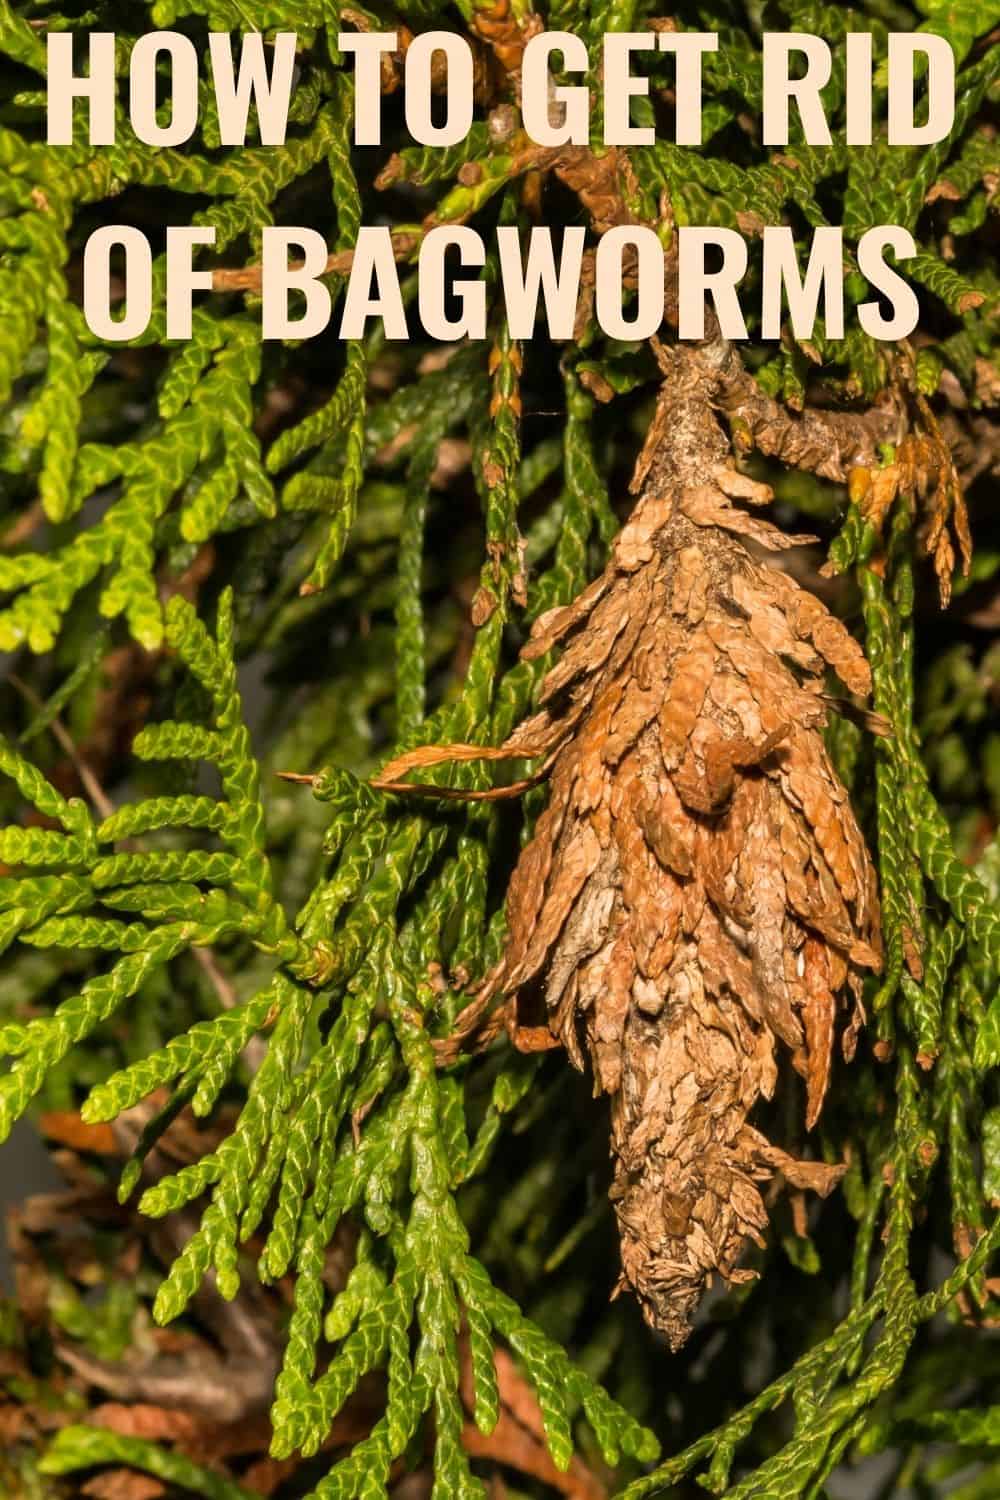 How to get rid of bagworms